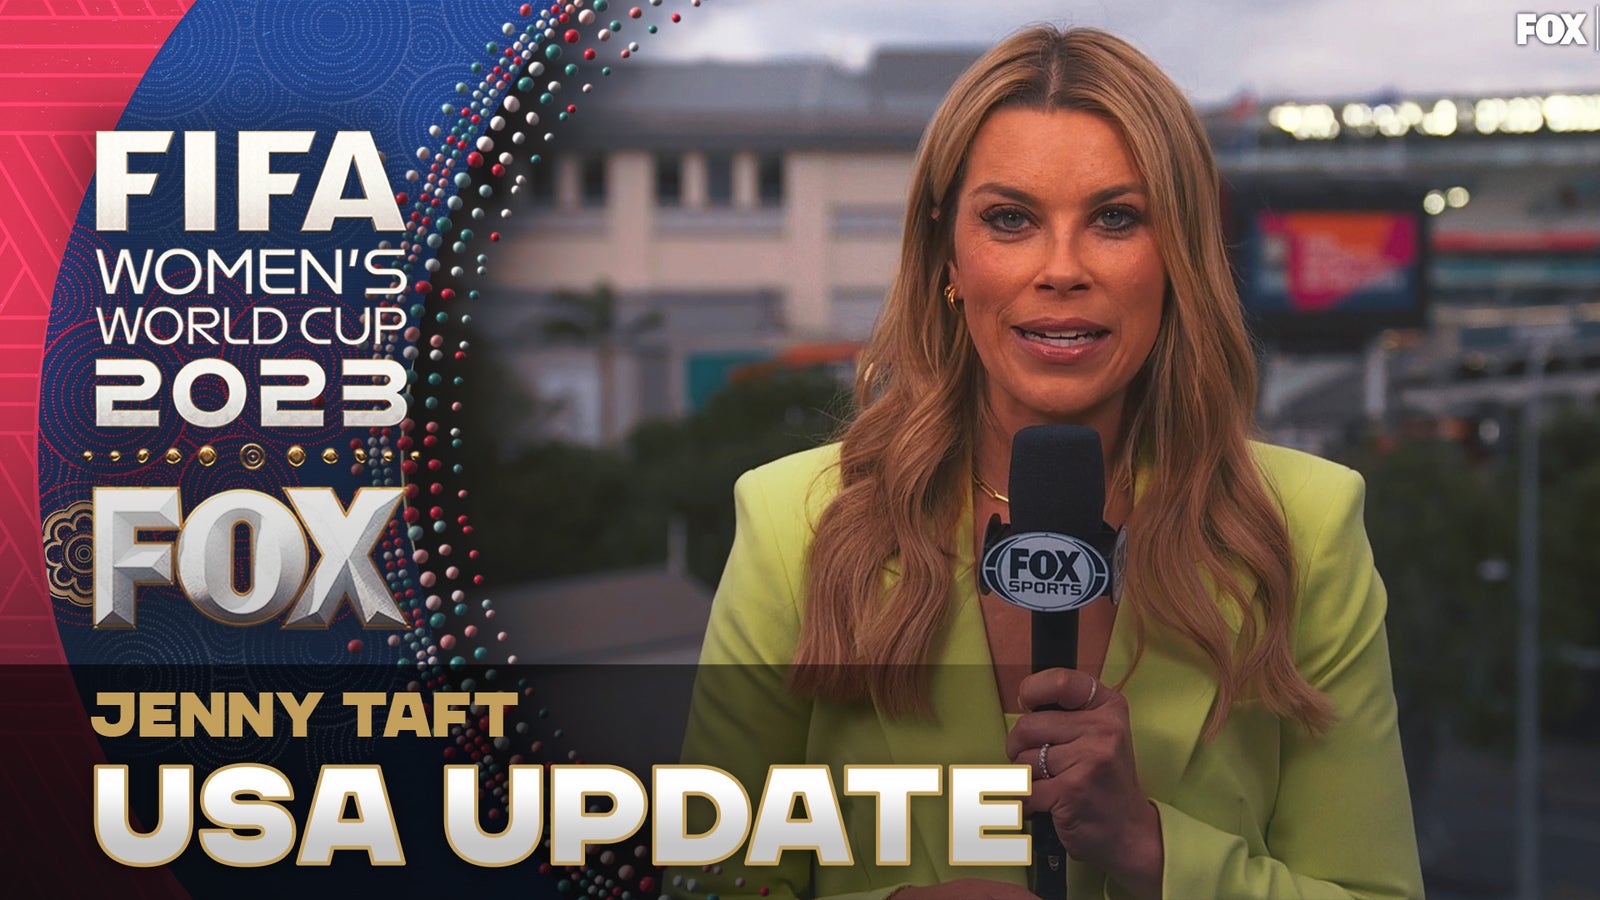 Jenny Taft provides an update on the USWNT ahead of the pivotal Portugal matchup